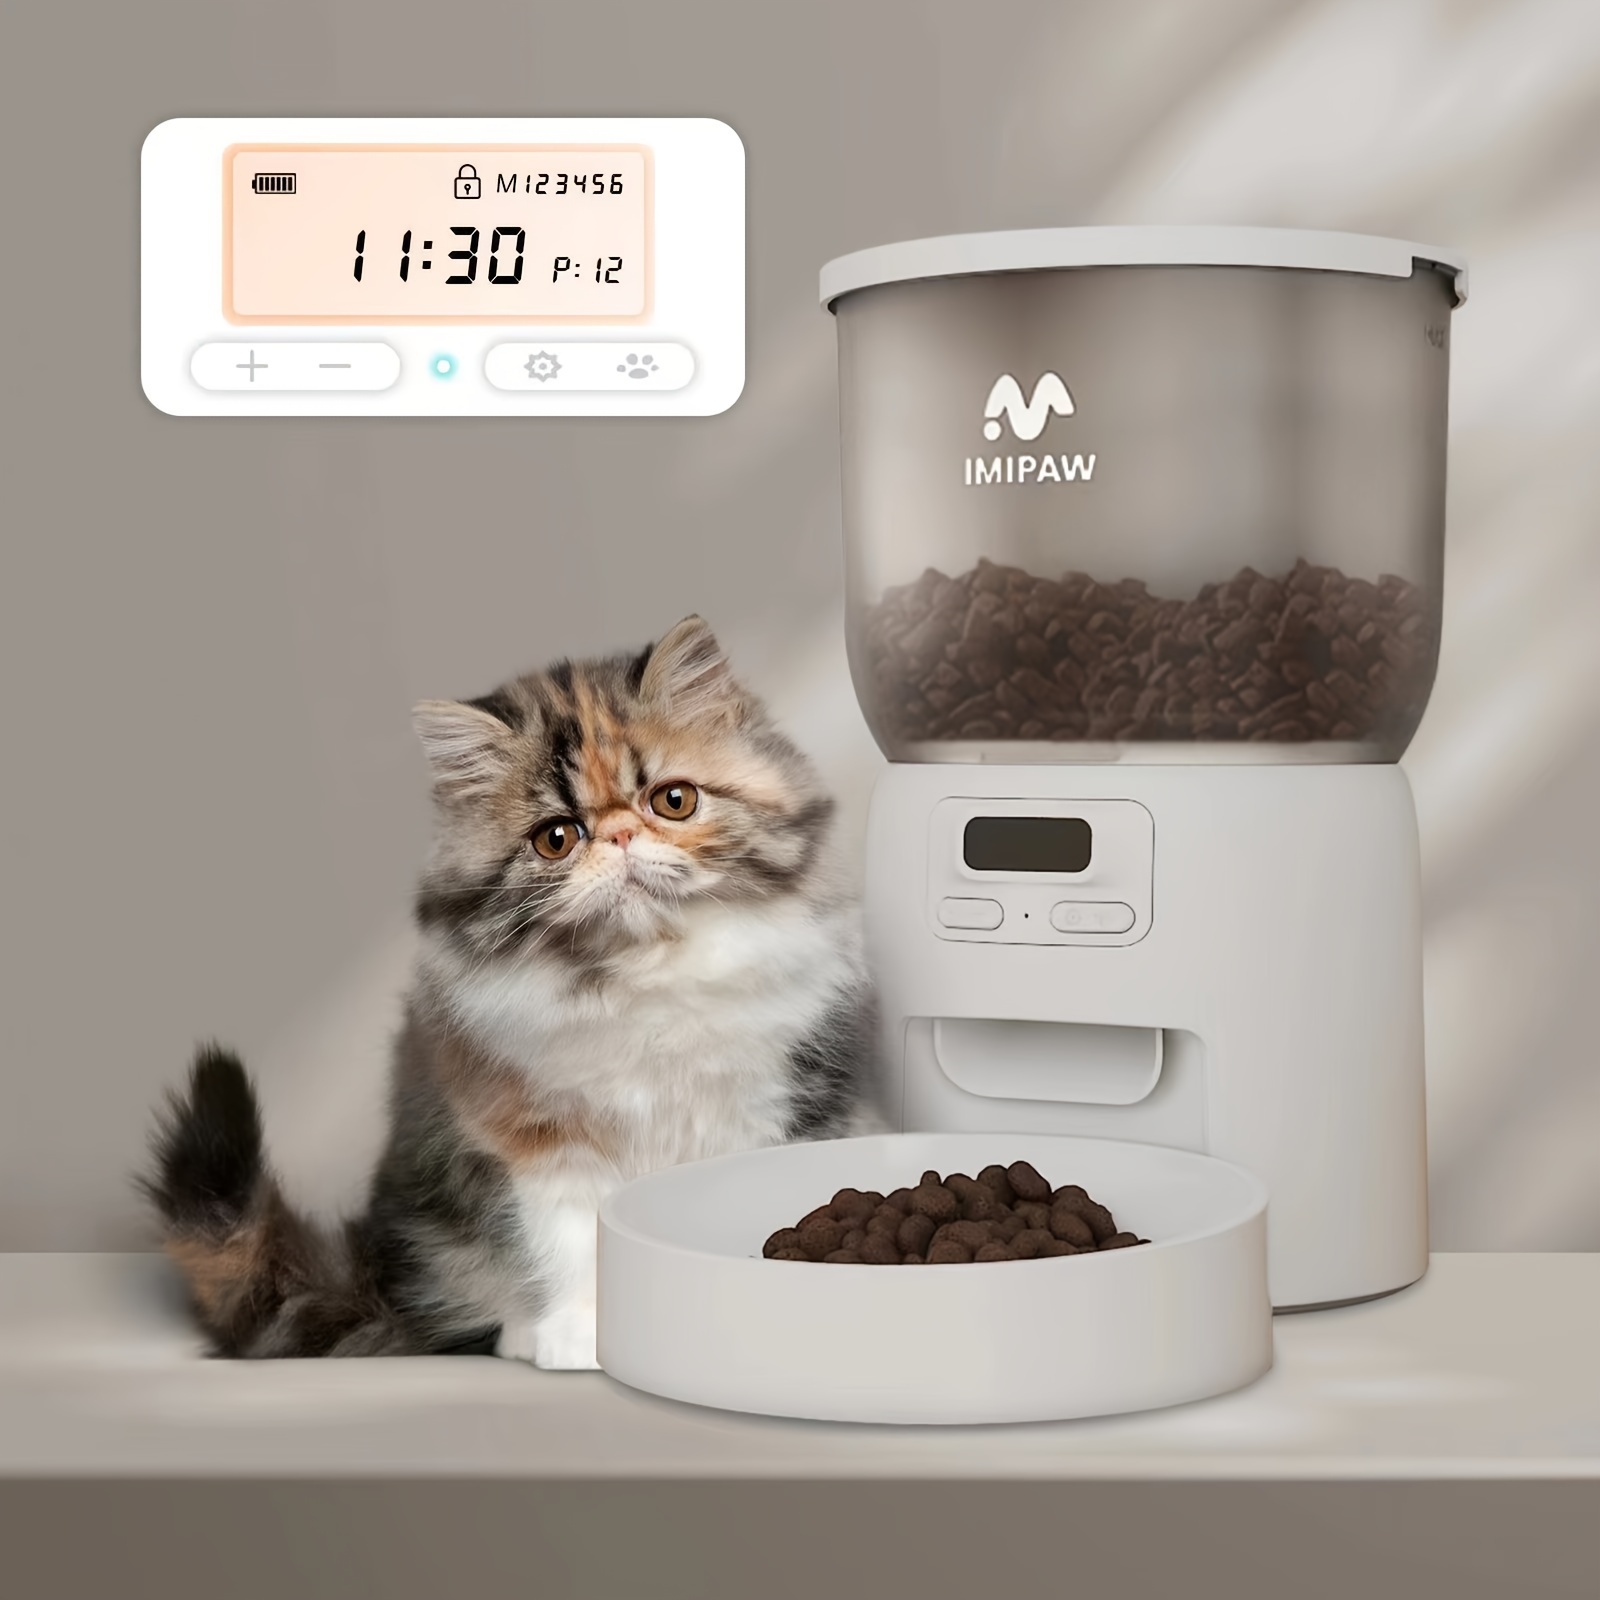 

3l Automatic Cat Feeder, Timed Pet Food Dispenser Cat Auto Food Container With Display Lcd Screen, Smart Auto Feeder With Food Tray Bowl For Indoor Cats